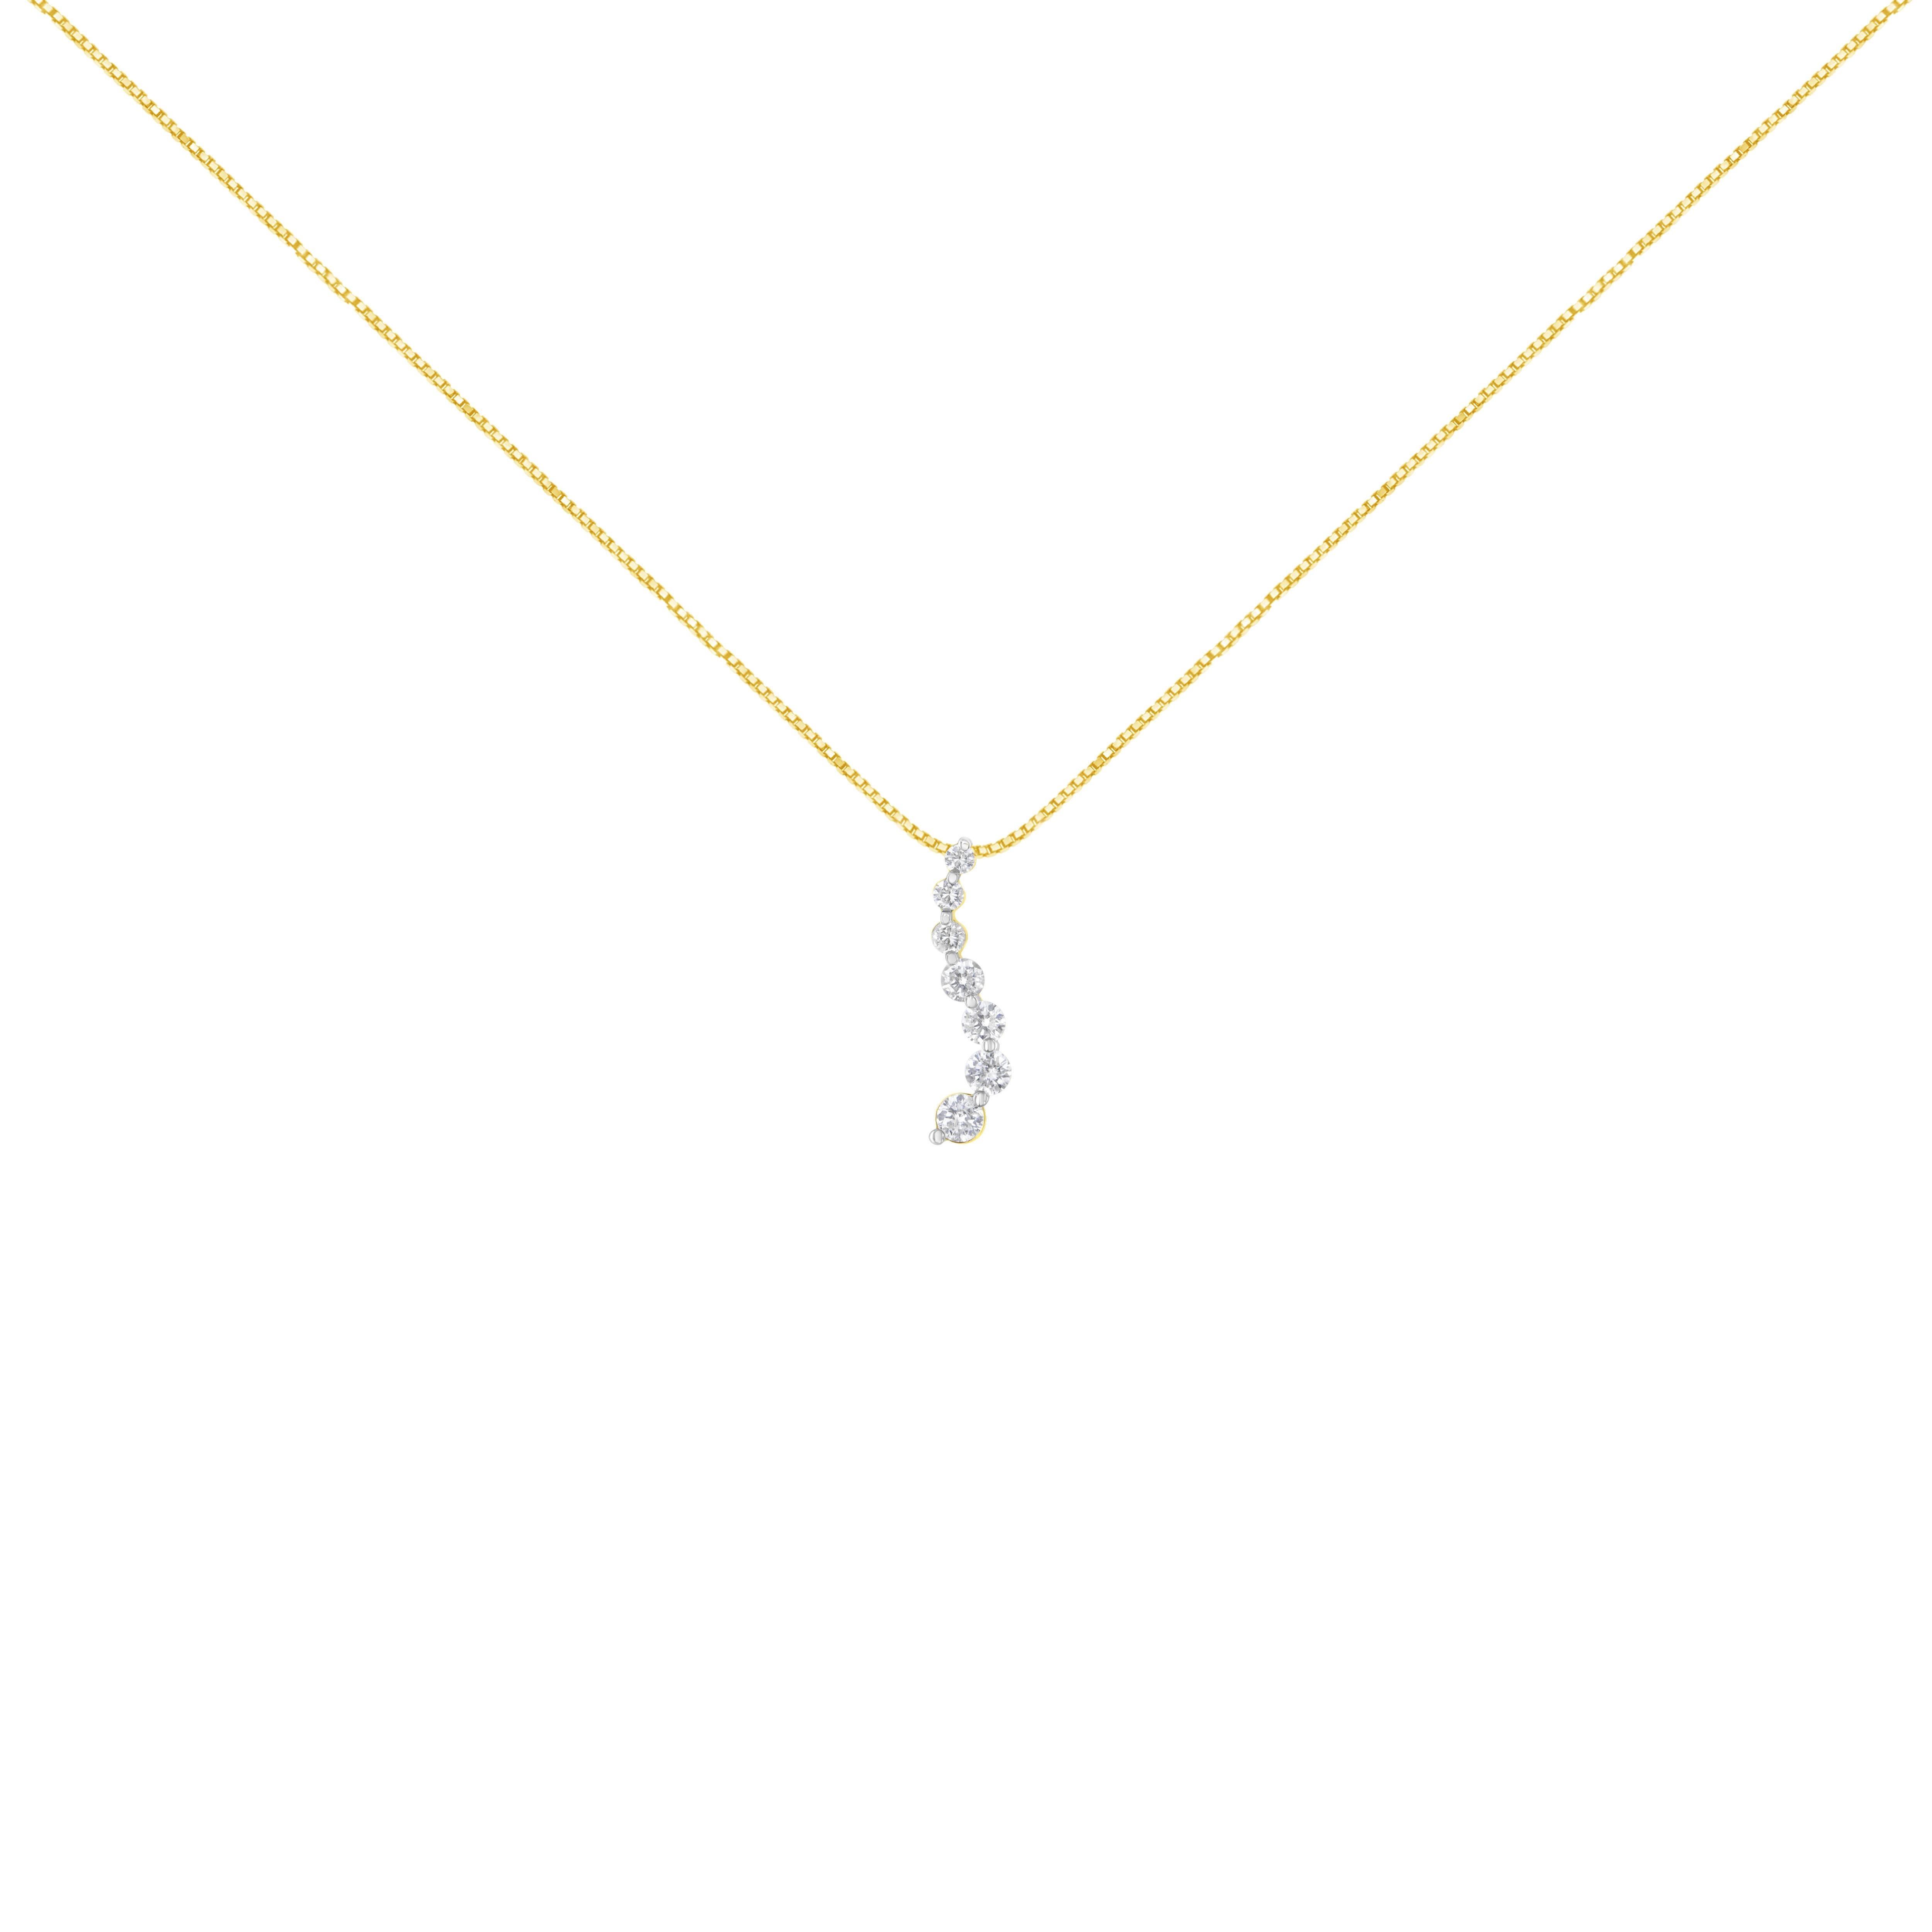 Surprise her by gifting her this beautiful 2.00 cttw diamond journey pendant on any special occasion. Featuring a classy design, the pendant is crafted of warm 14k yellow gold. It is elegantly adorned with sparkling 7 graduating, prong-set round cut